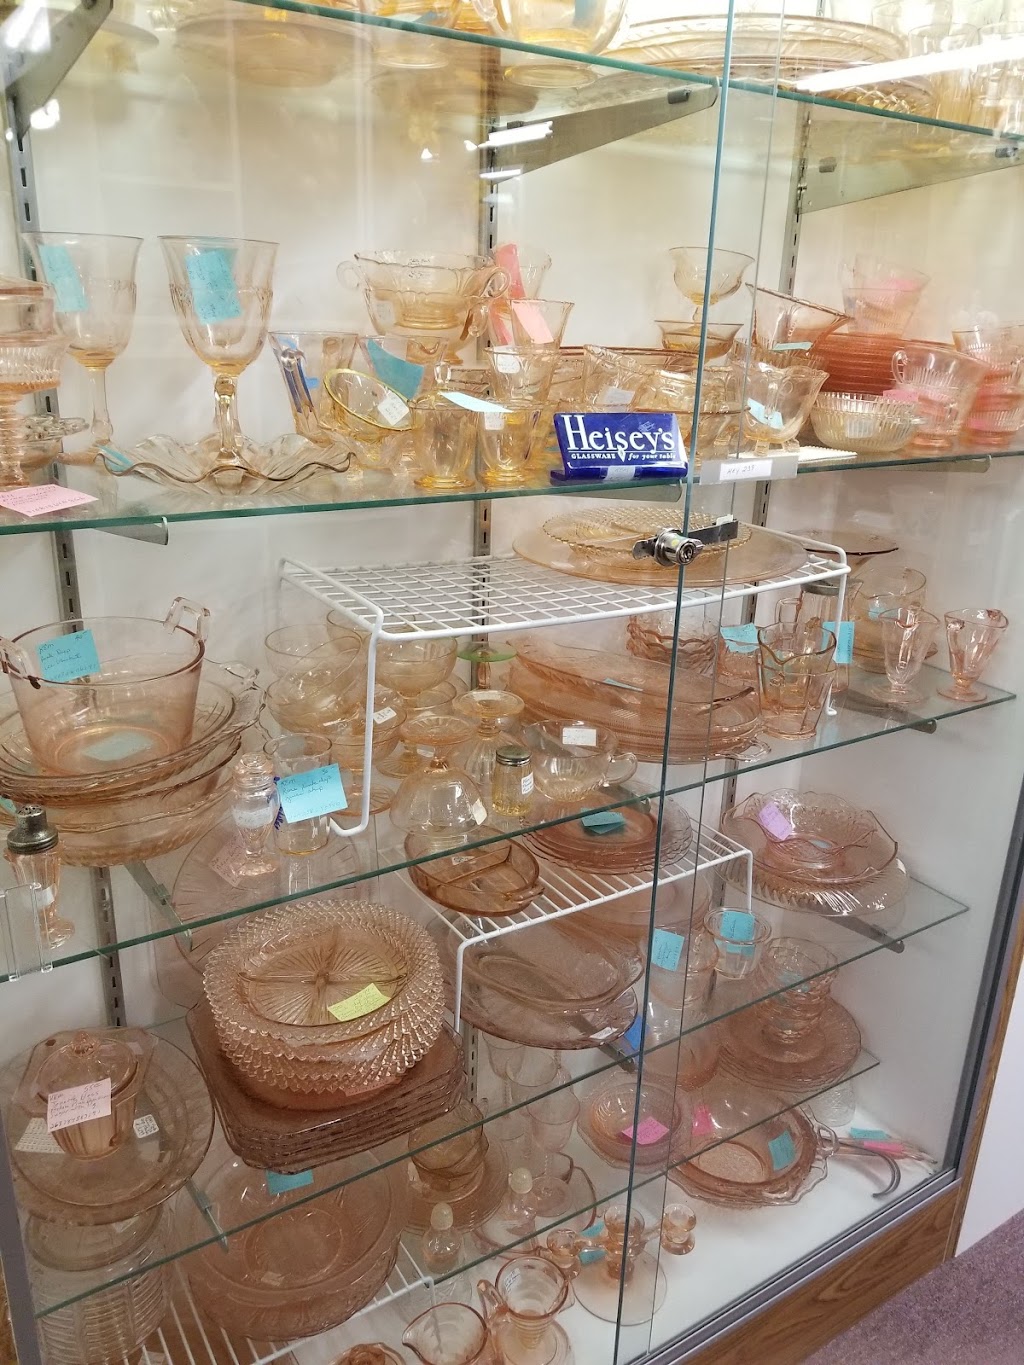 Pottery Place Antiques | 2000 Old W Main St, Red Wing, MN 55066, USA | Phone: (651) 388-7765